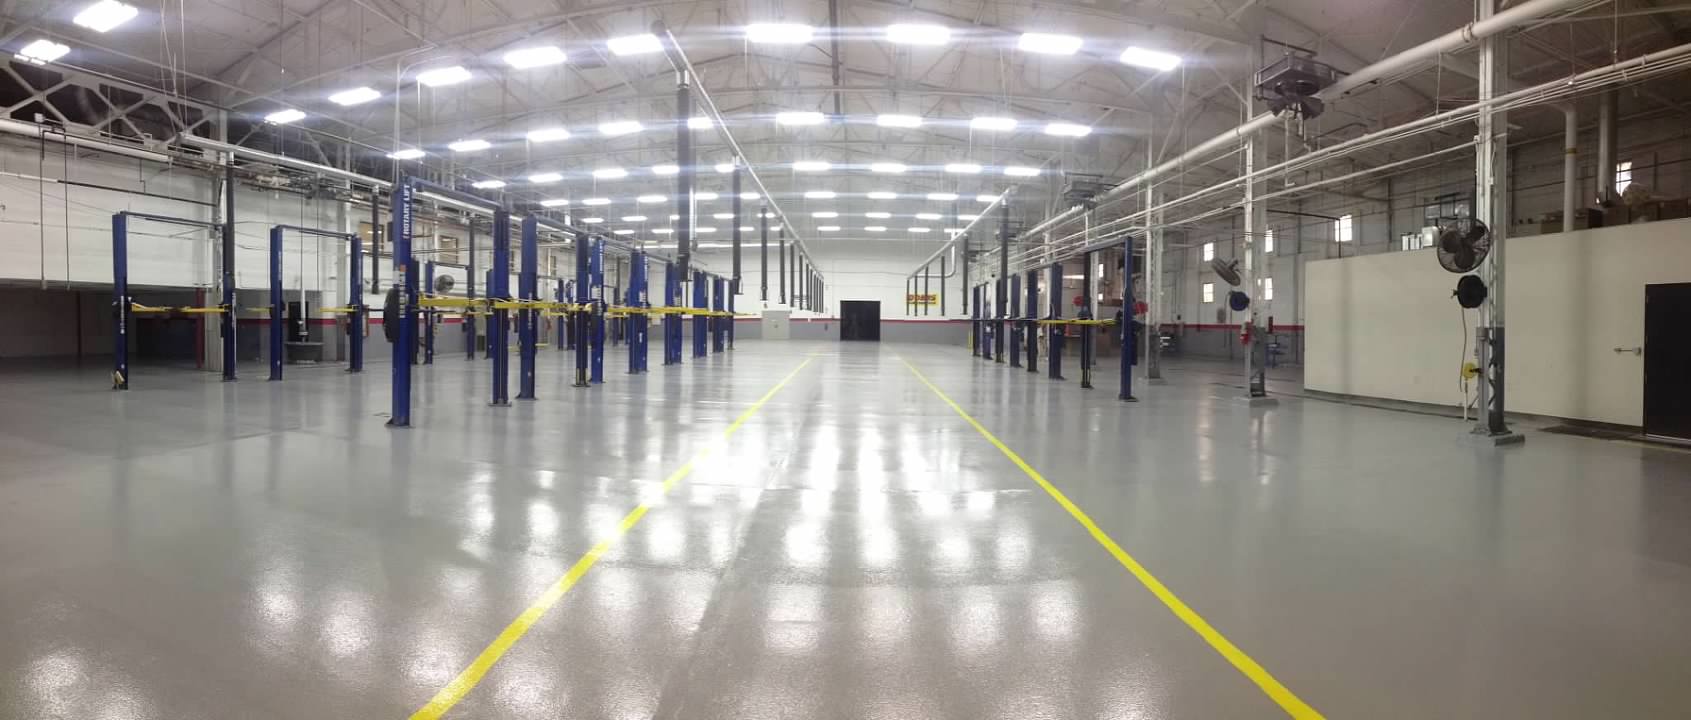 Coated floor with multiple large car jacks lined up